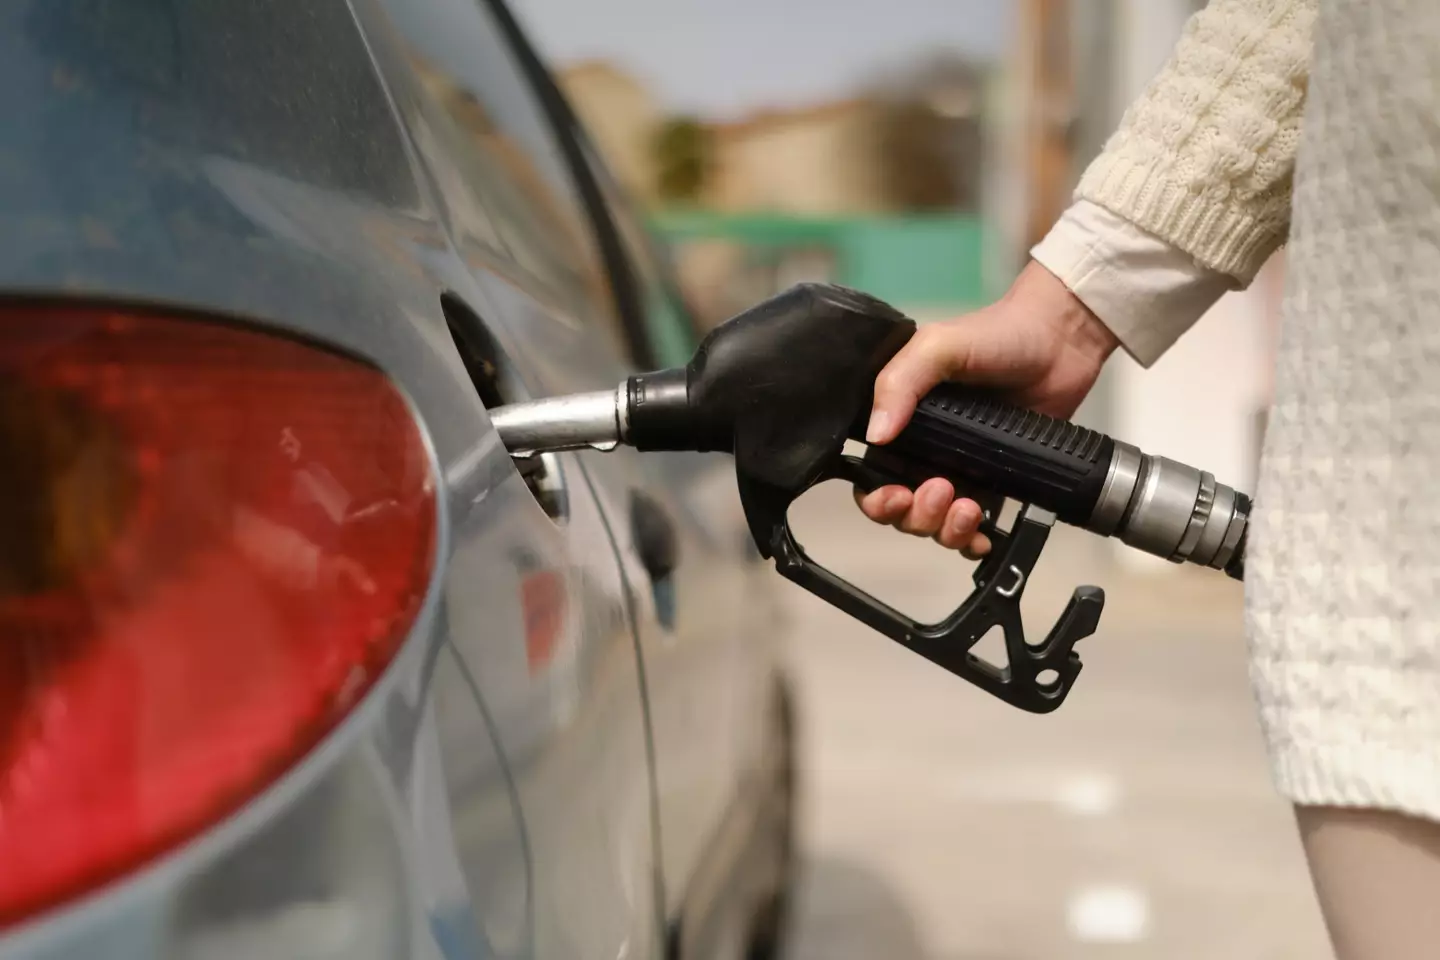 You could save up to £200 at the petrol pump each year if you keep your car clean.